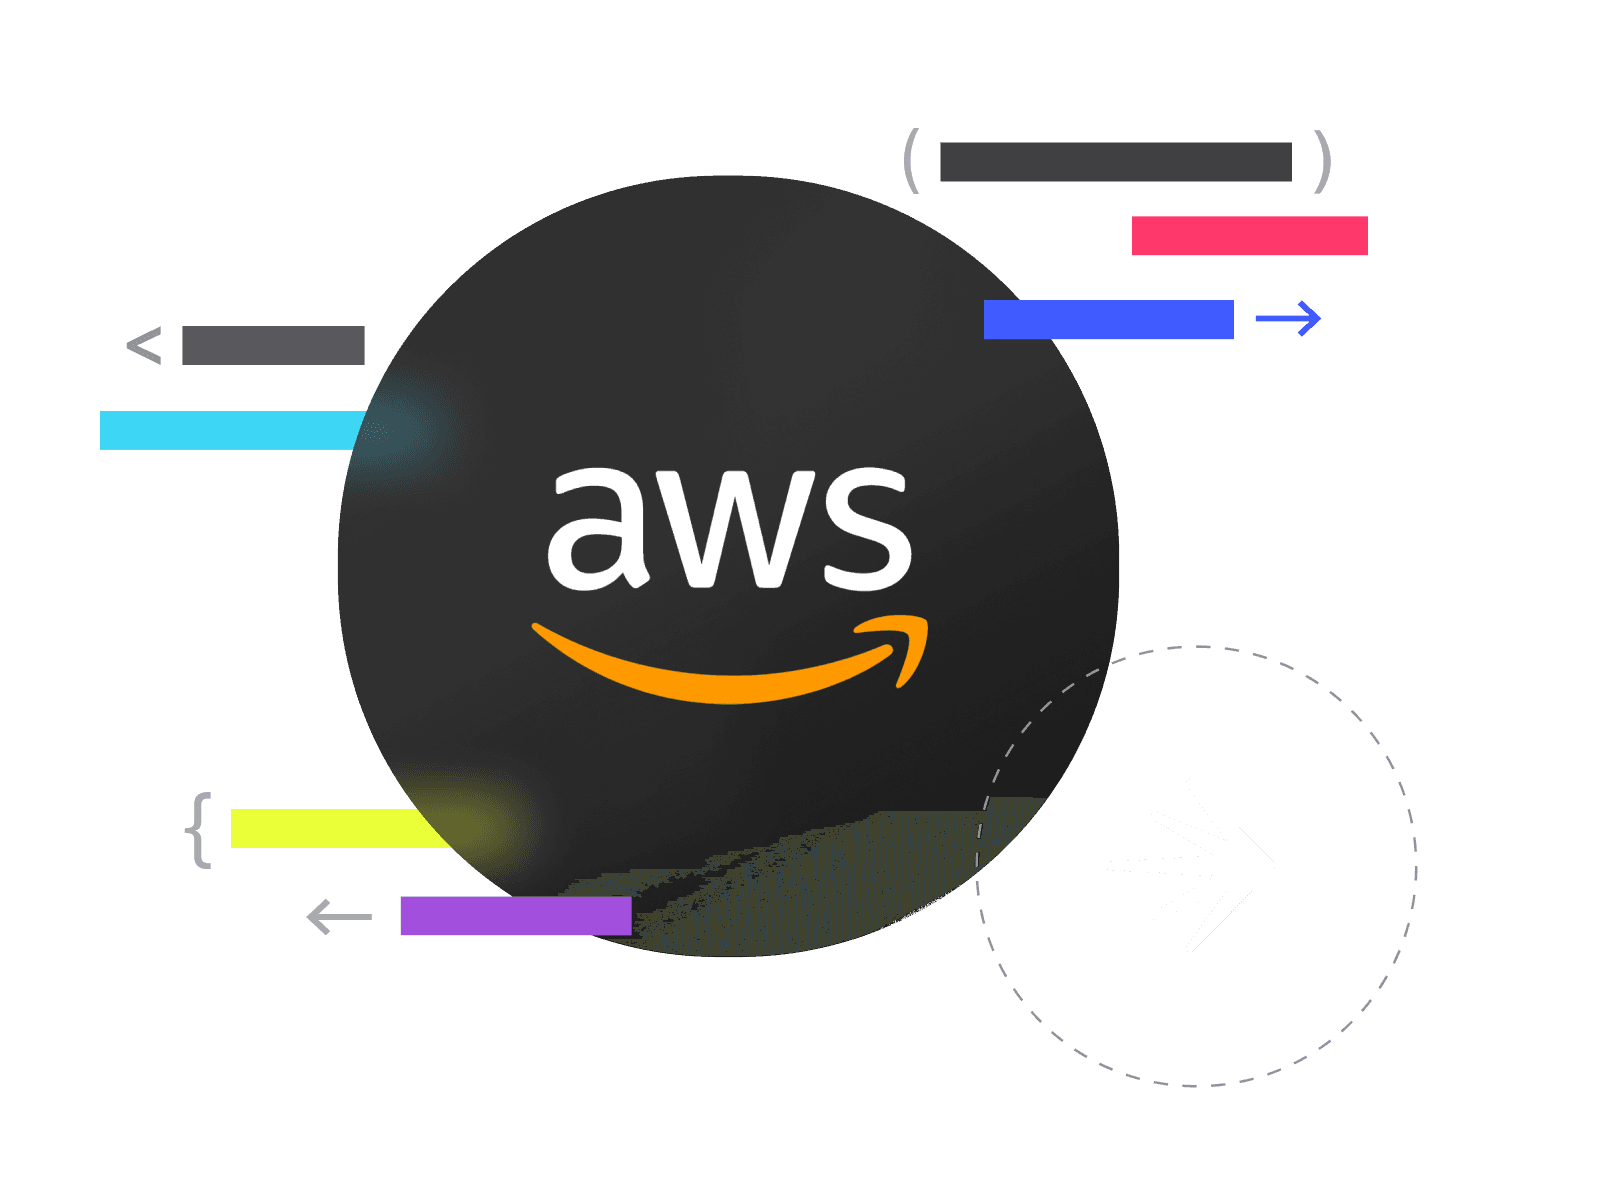 Deliver and control your software on AWS.